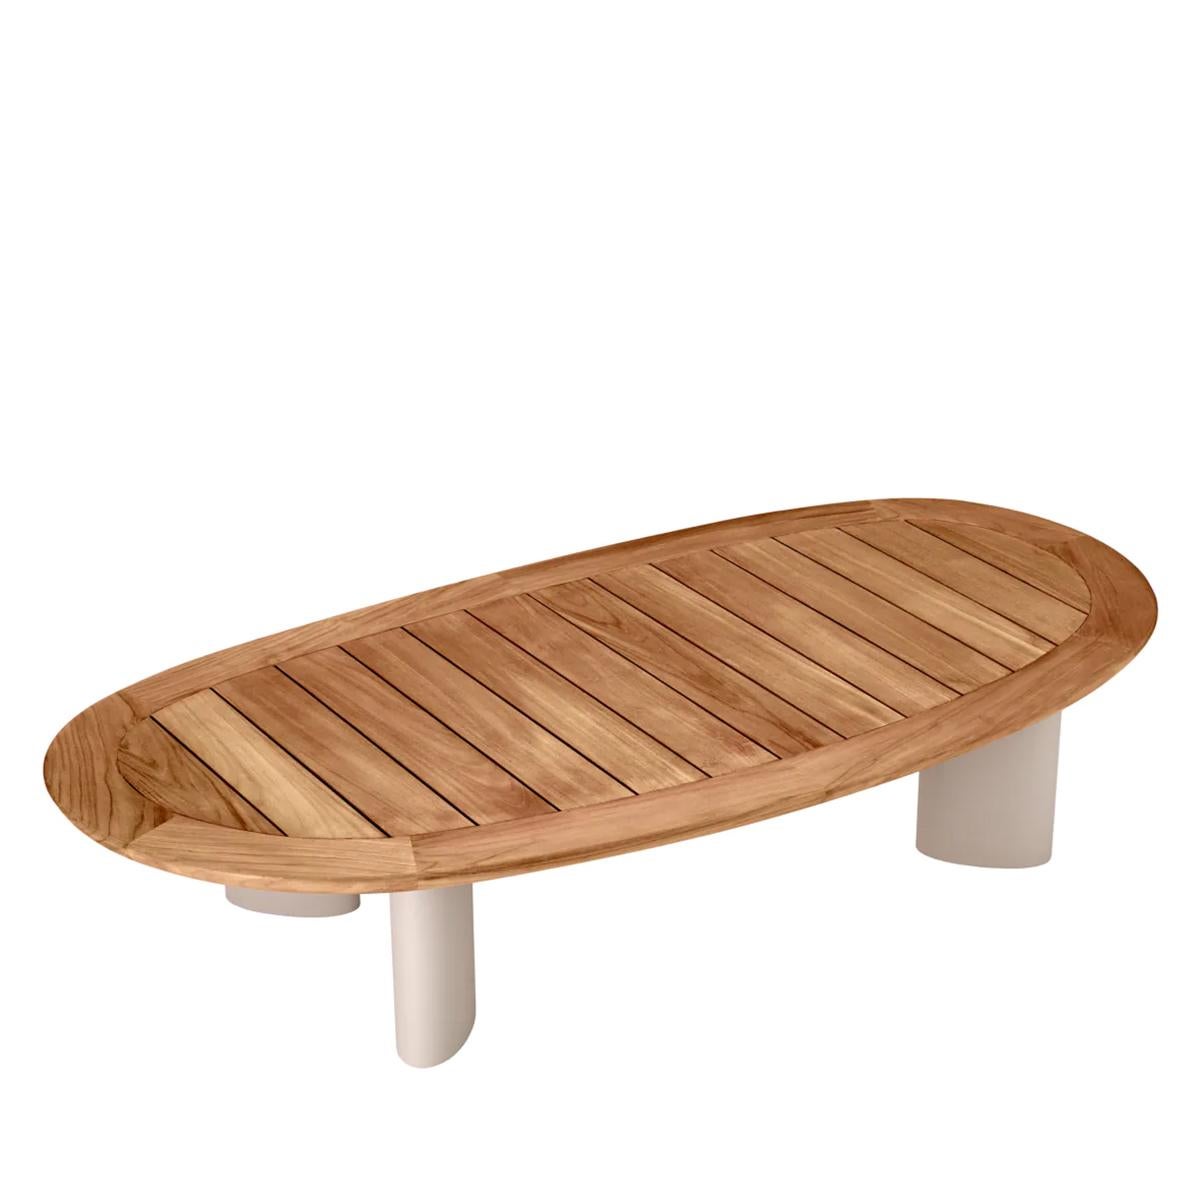 Coffee Table Teeko Outdoor with top in solid teak in natural finish
and with feet in aluminium in powder coated matte sand color finish.